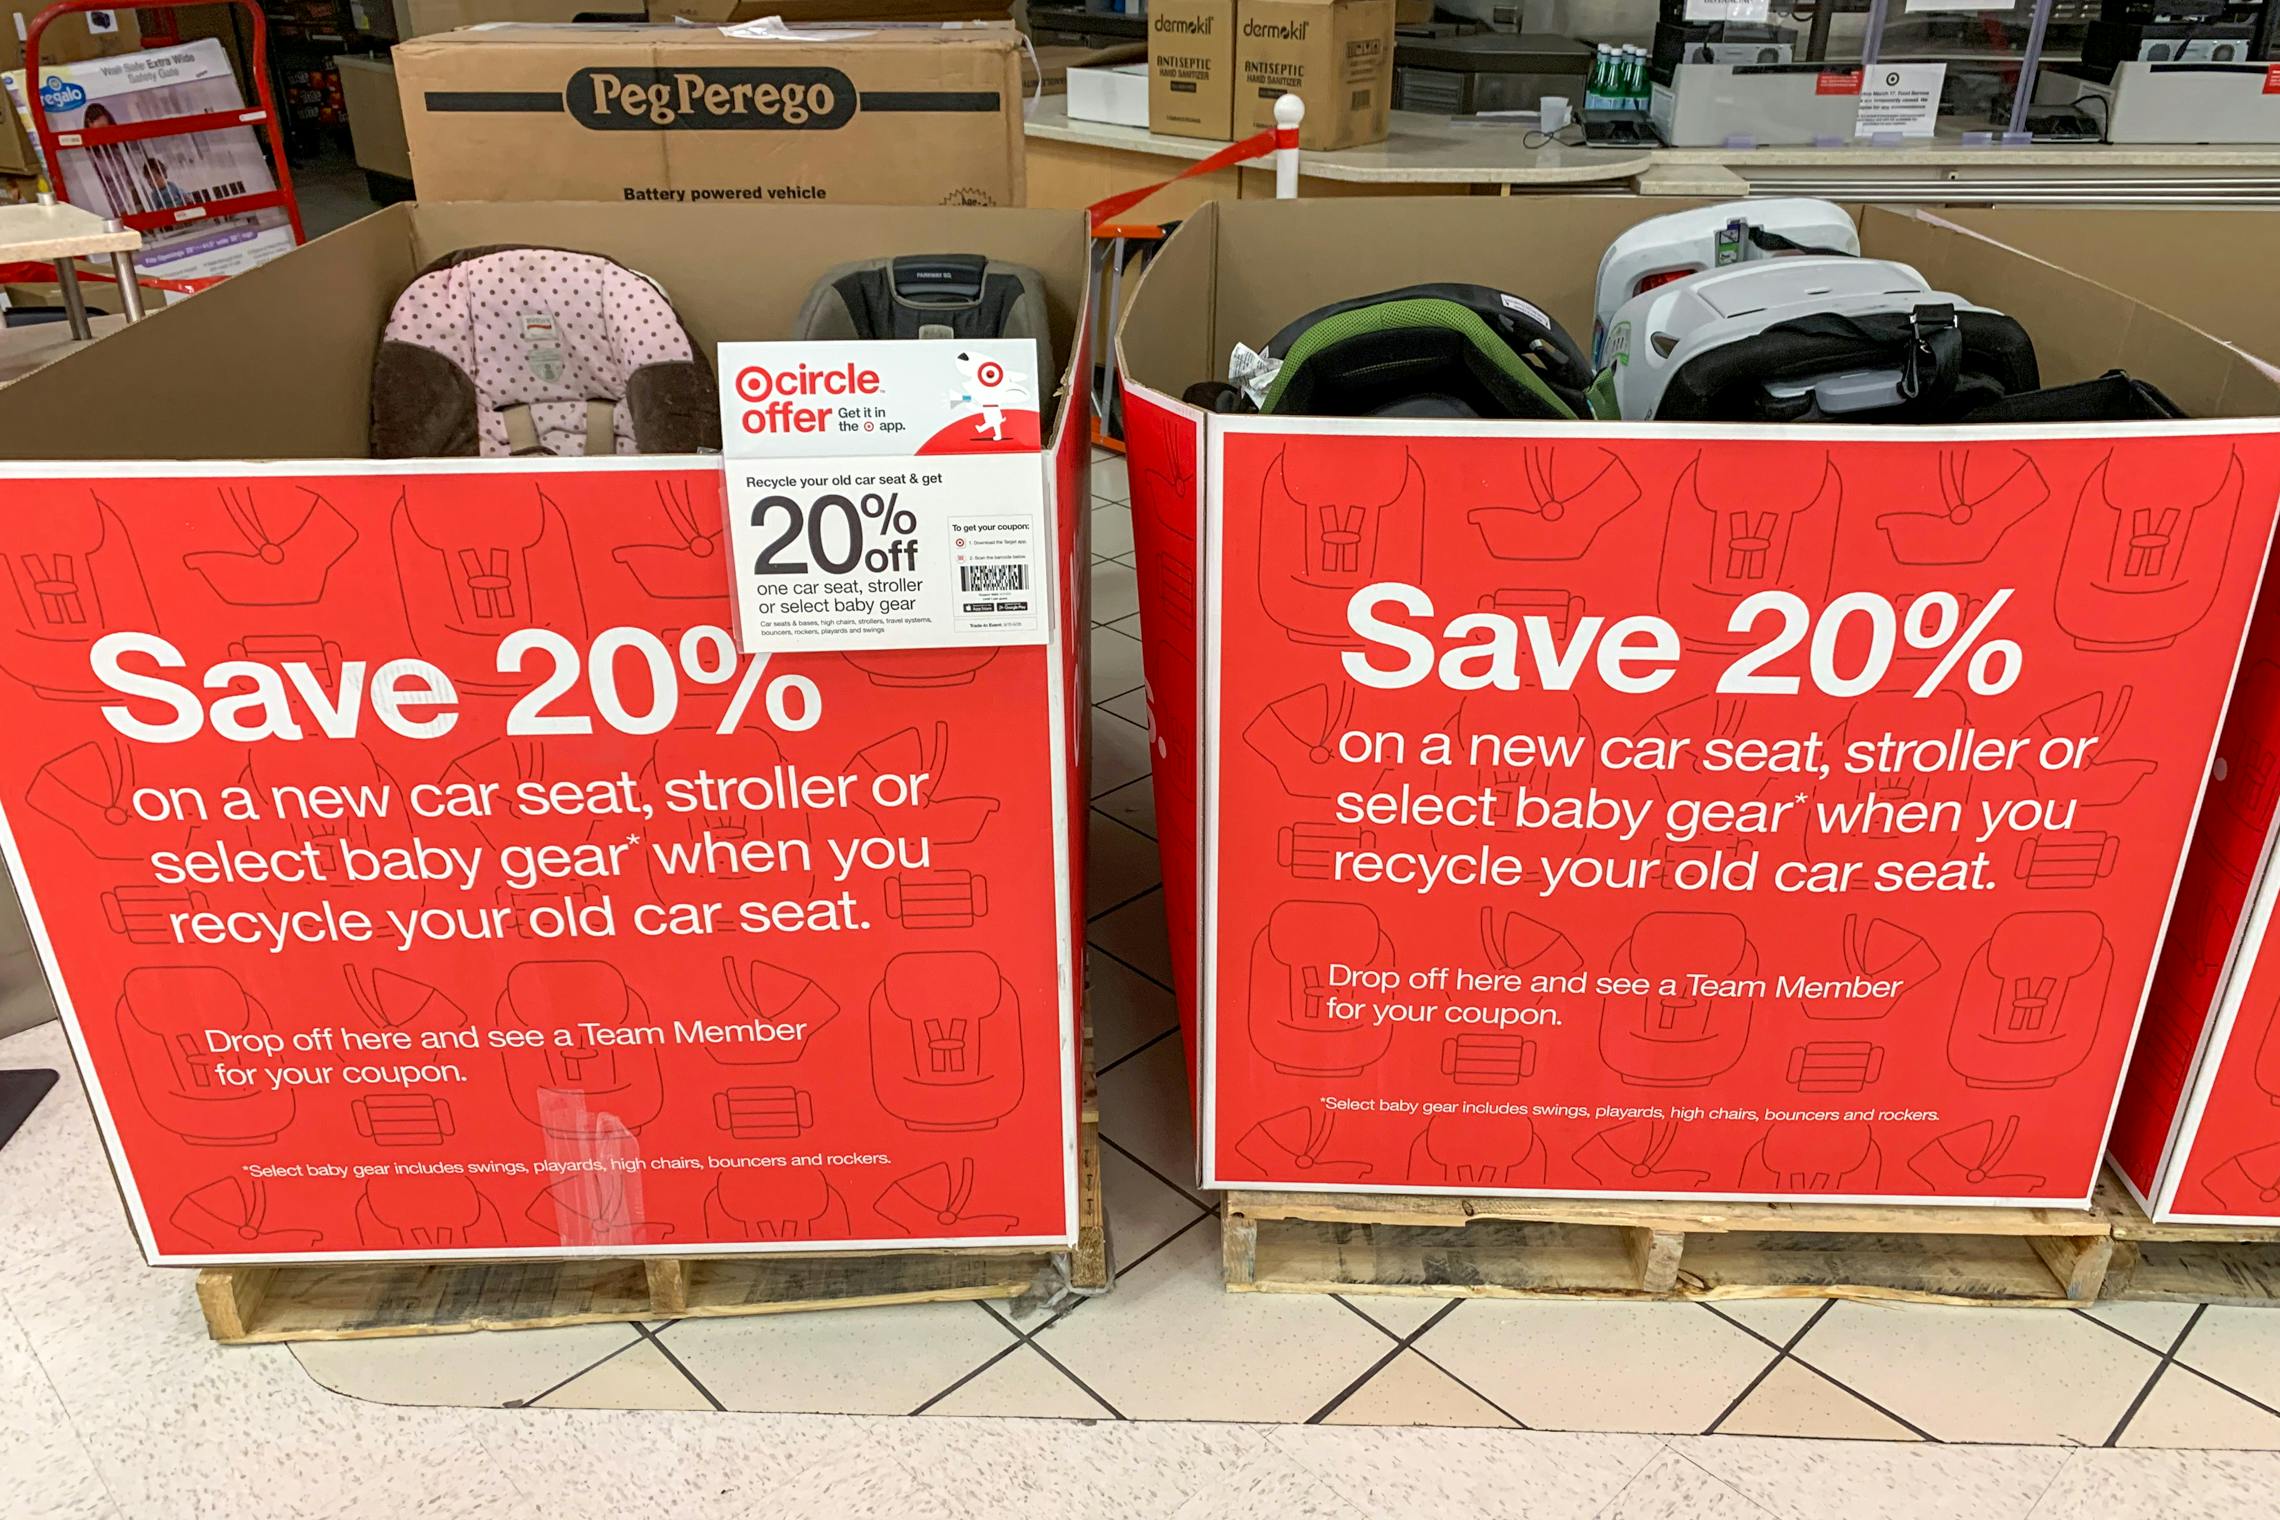 target-s-car-seat-trade-in-event-will-get-you-a-20-off-target-coupon